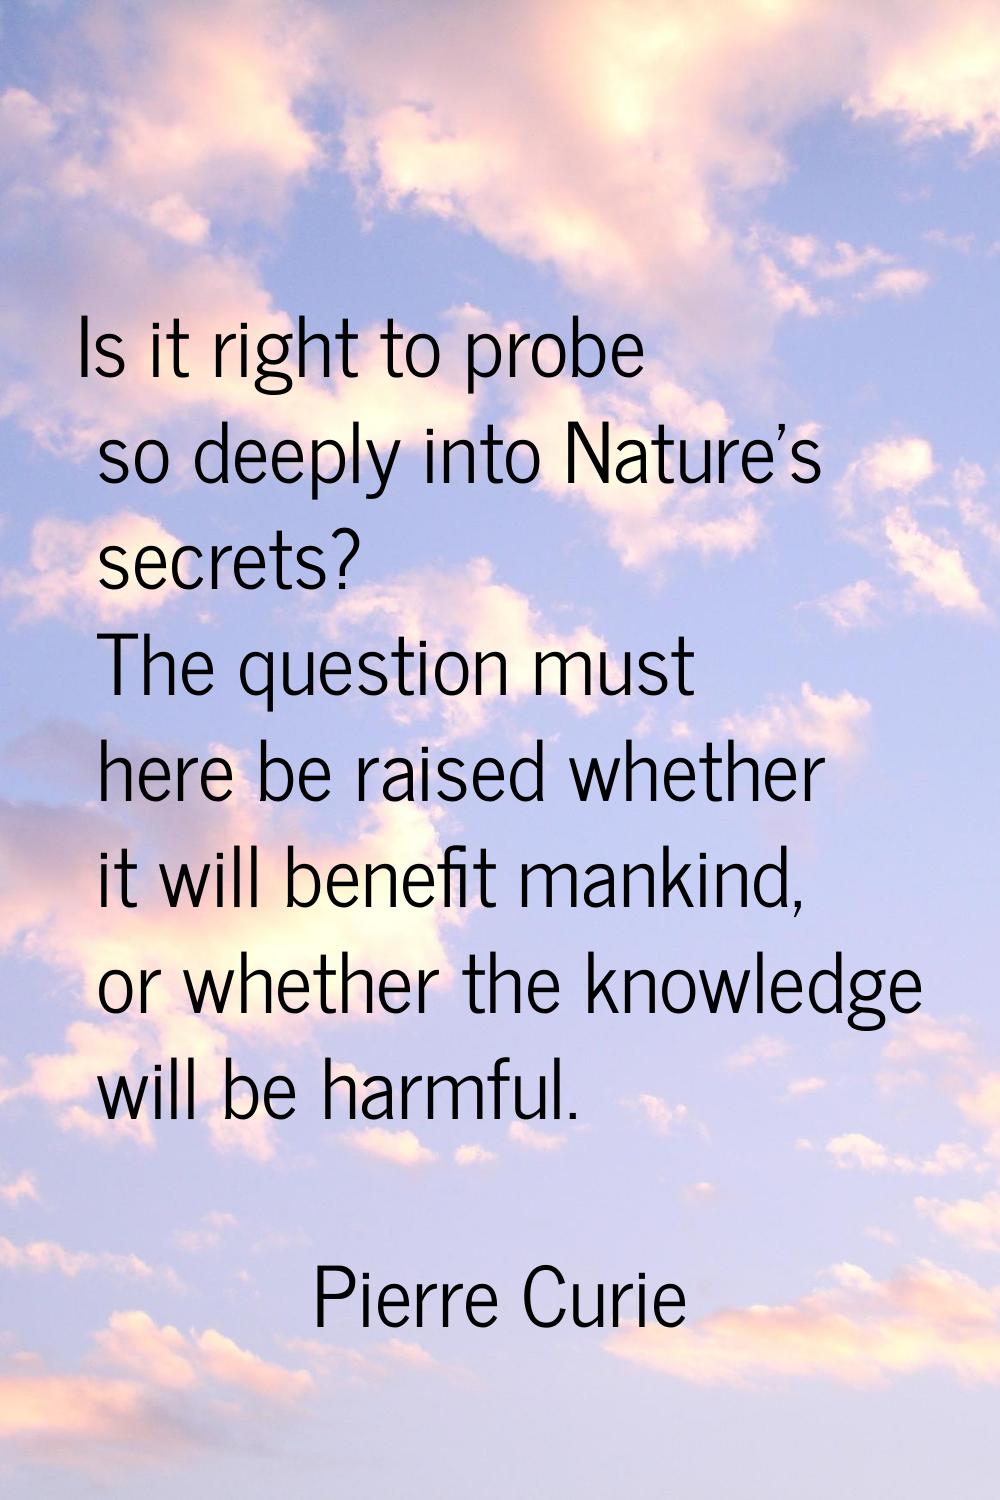 Is it right to probe so deeply into Nature's secrets? The question must here be raised whether it w